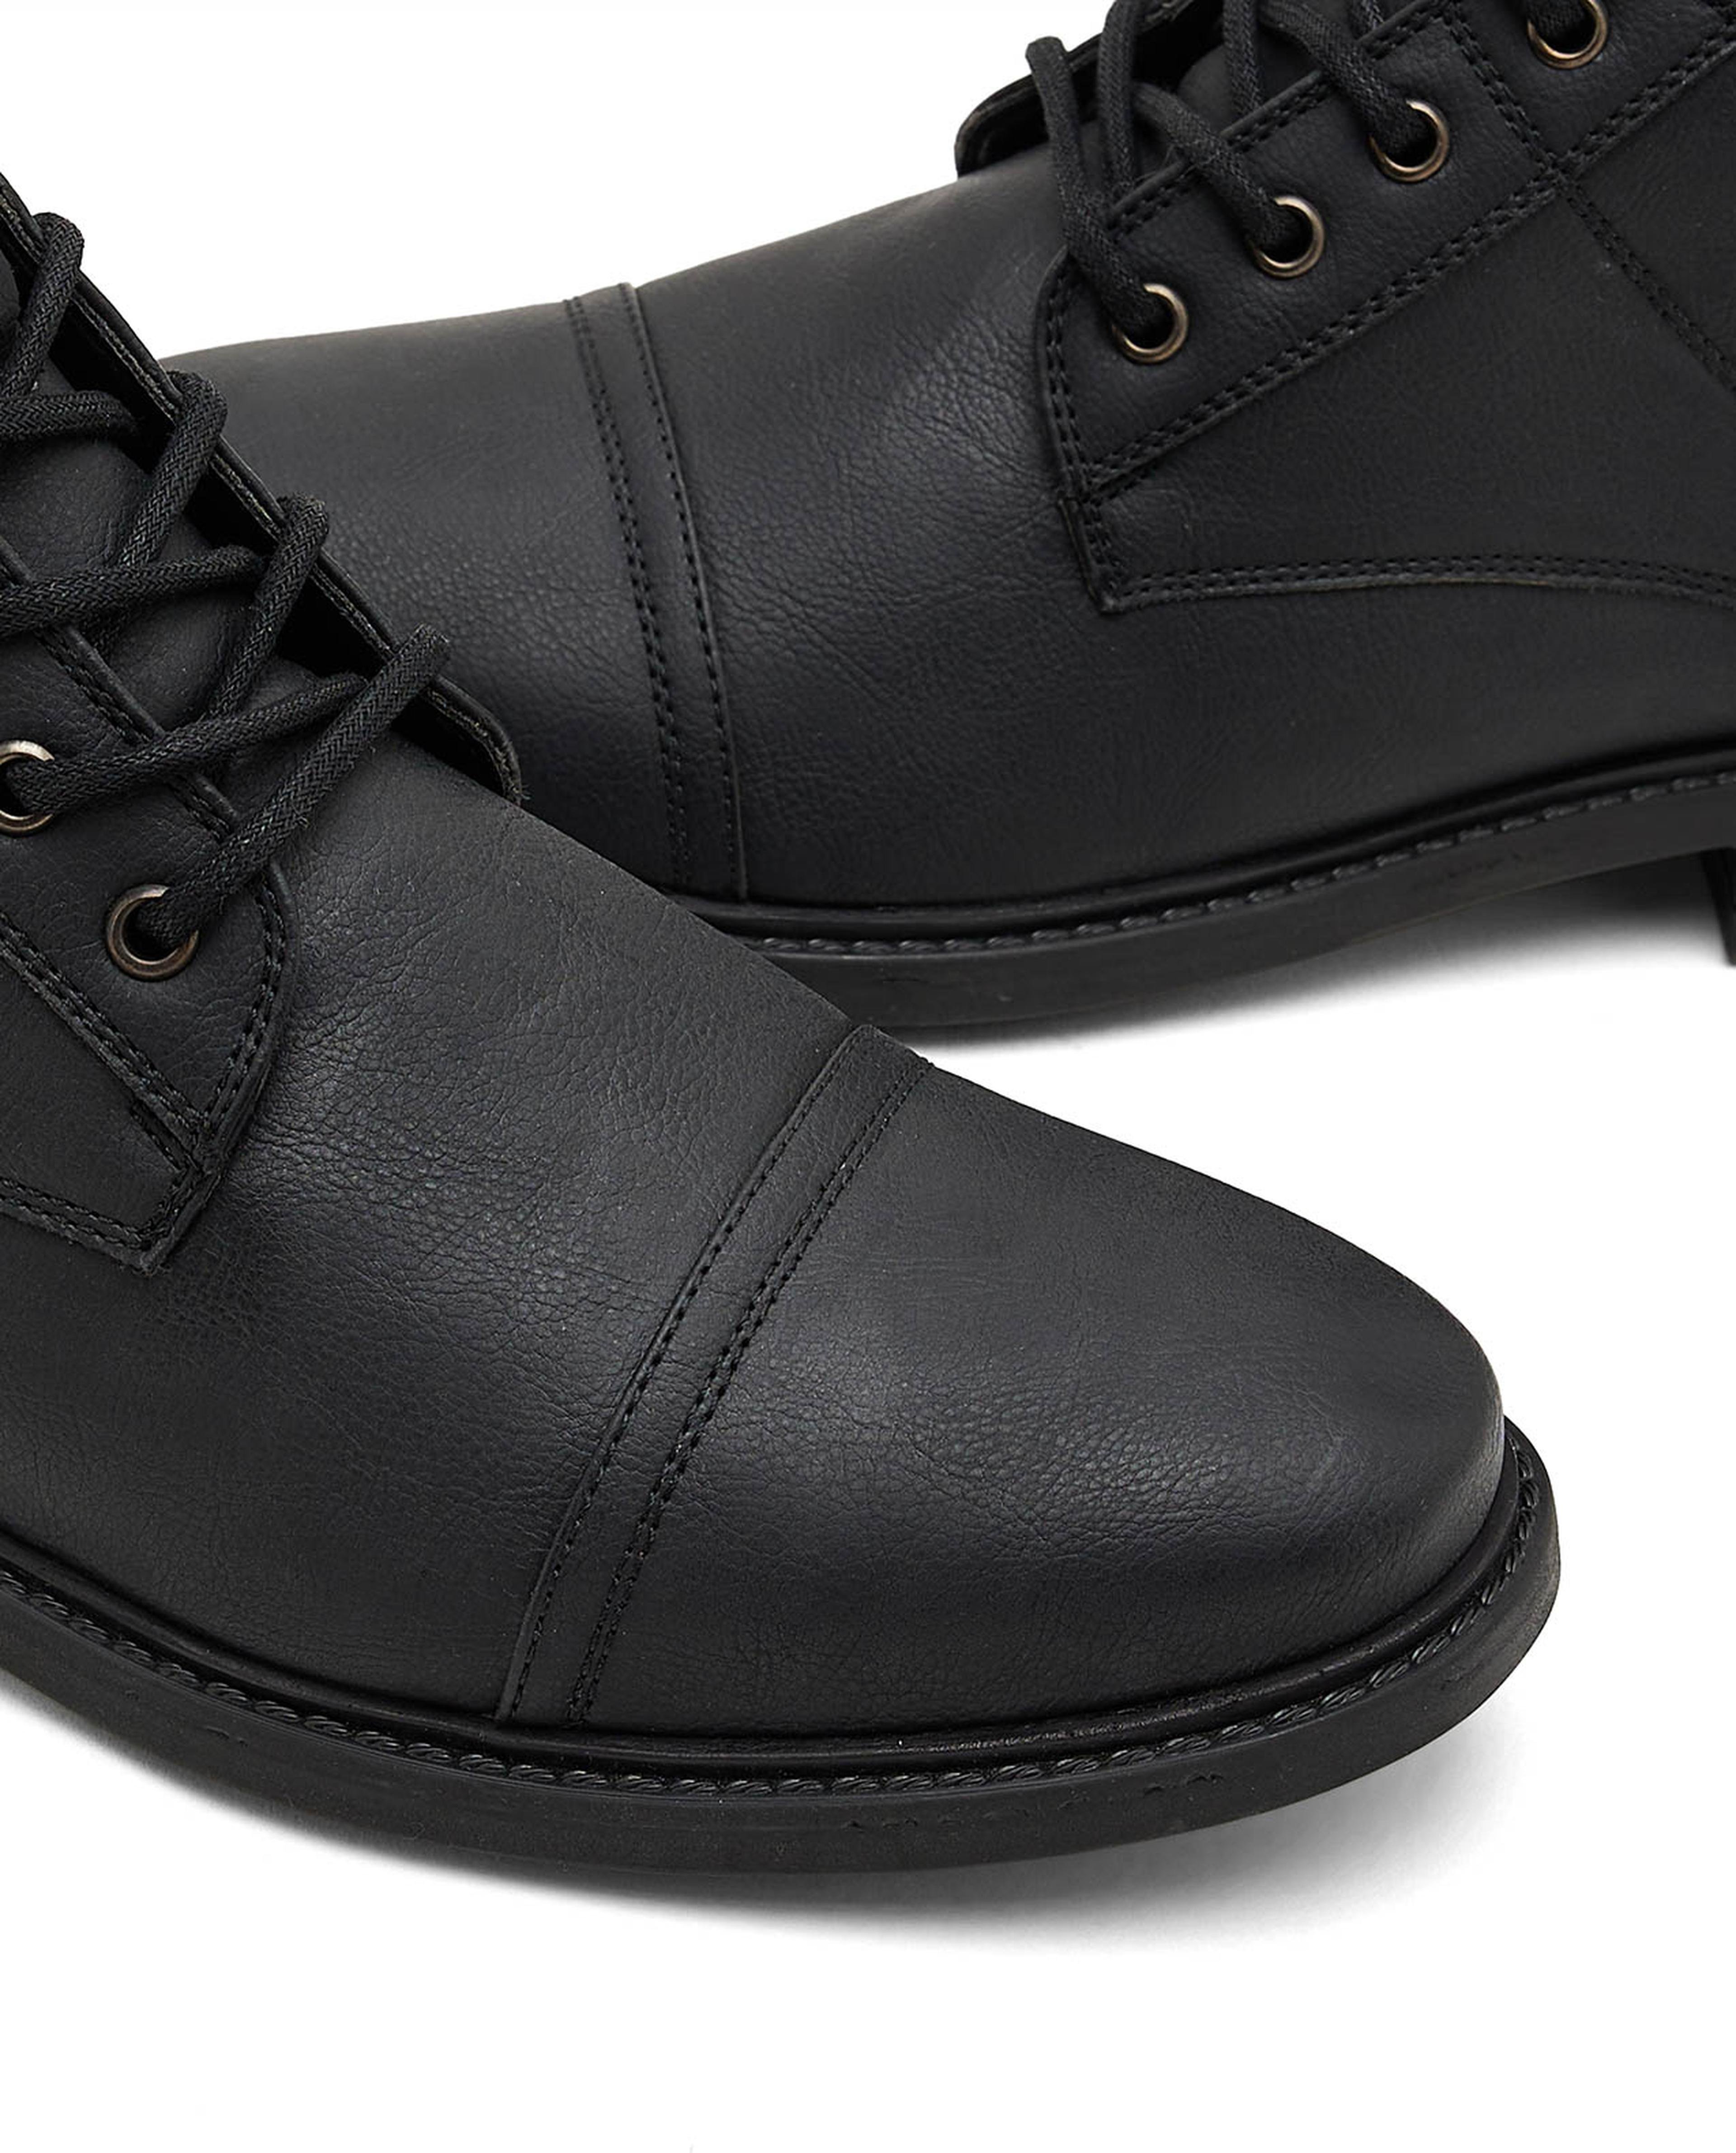 Cuff Detail Casual Boots